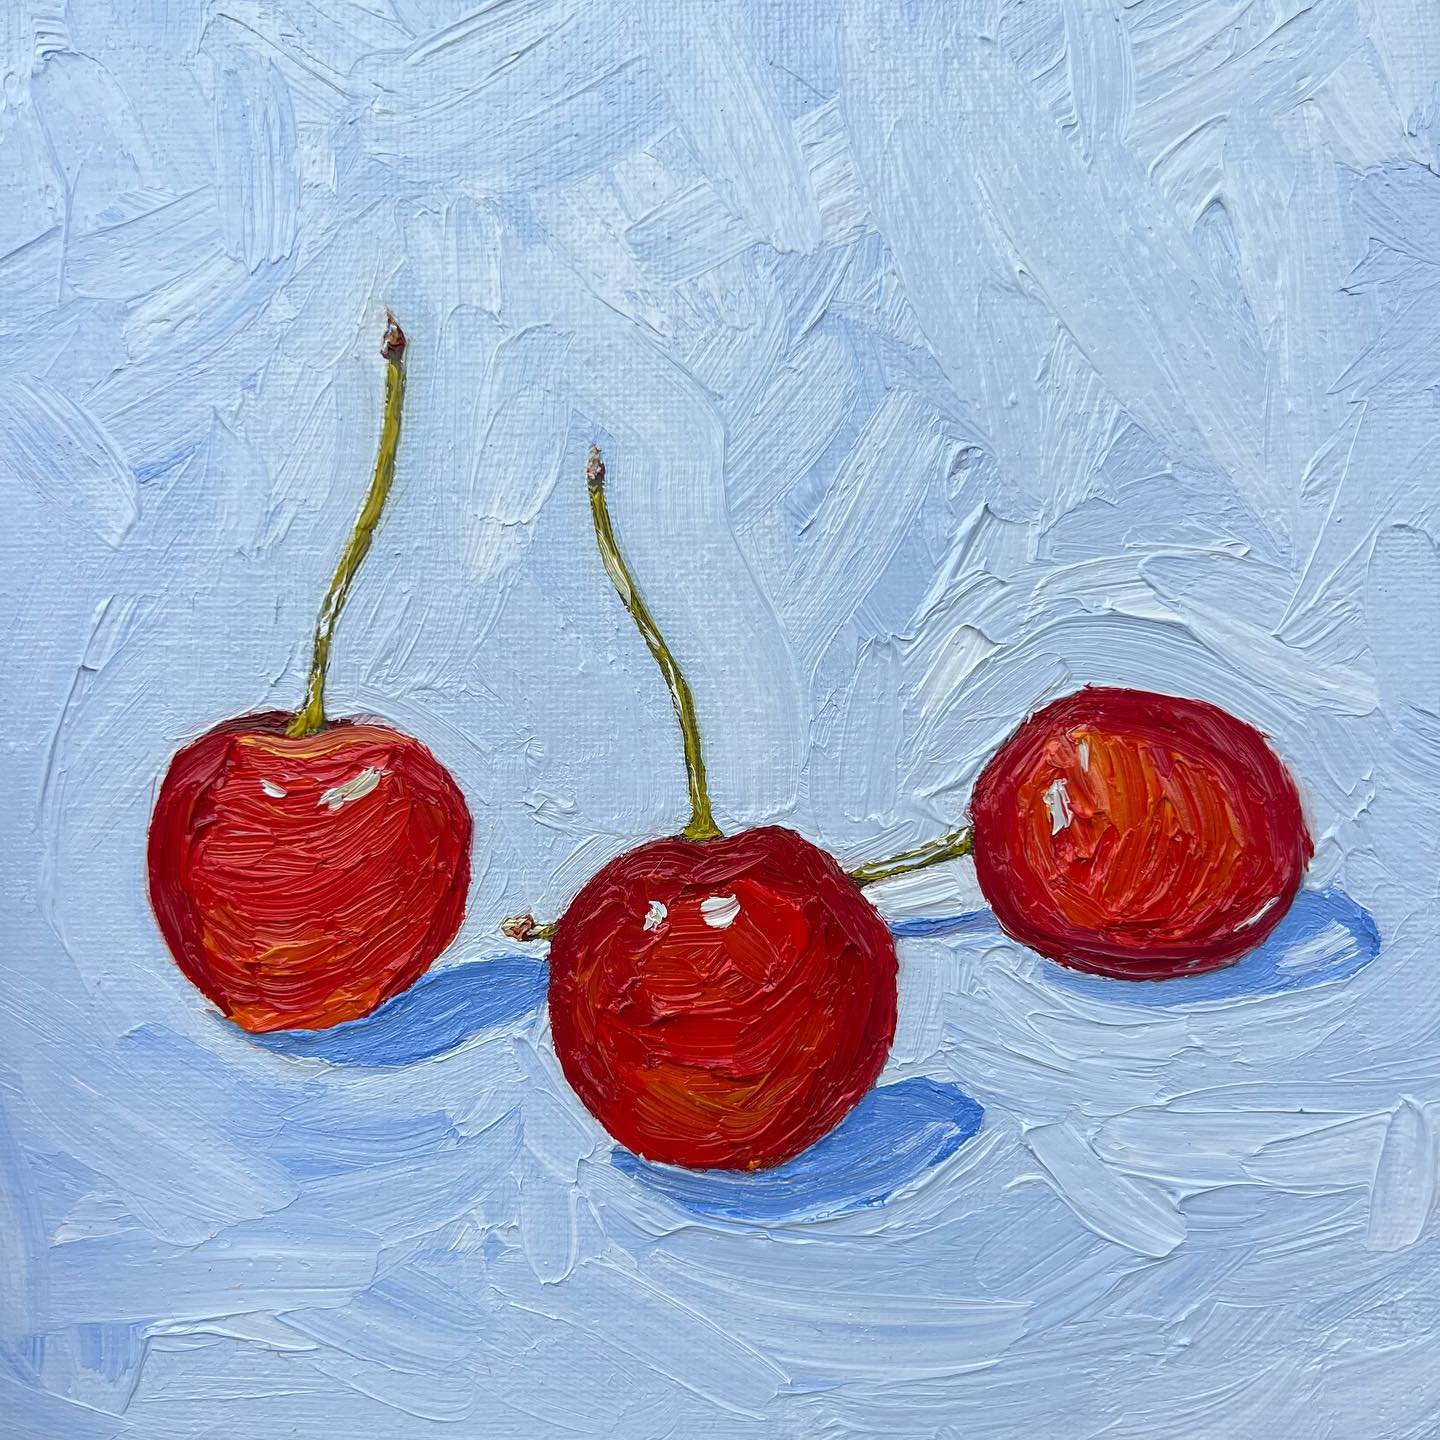 Cerises III 🍒 
Oil on Canvas 
20x20cm 

Will be exhibited at @theotherartfair Sydney 16th to 19th of May 🧡